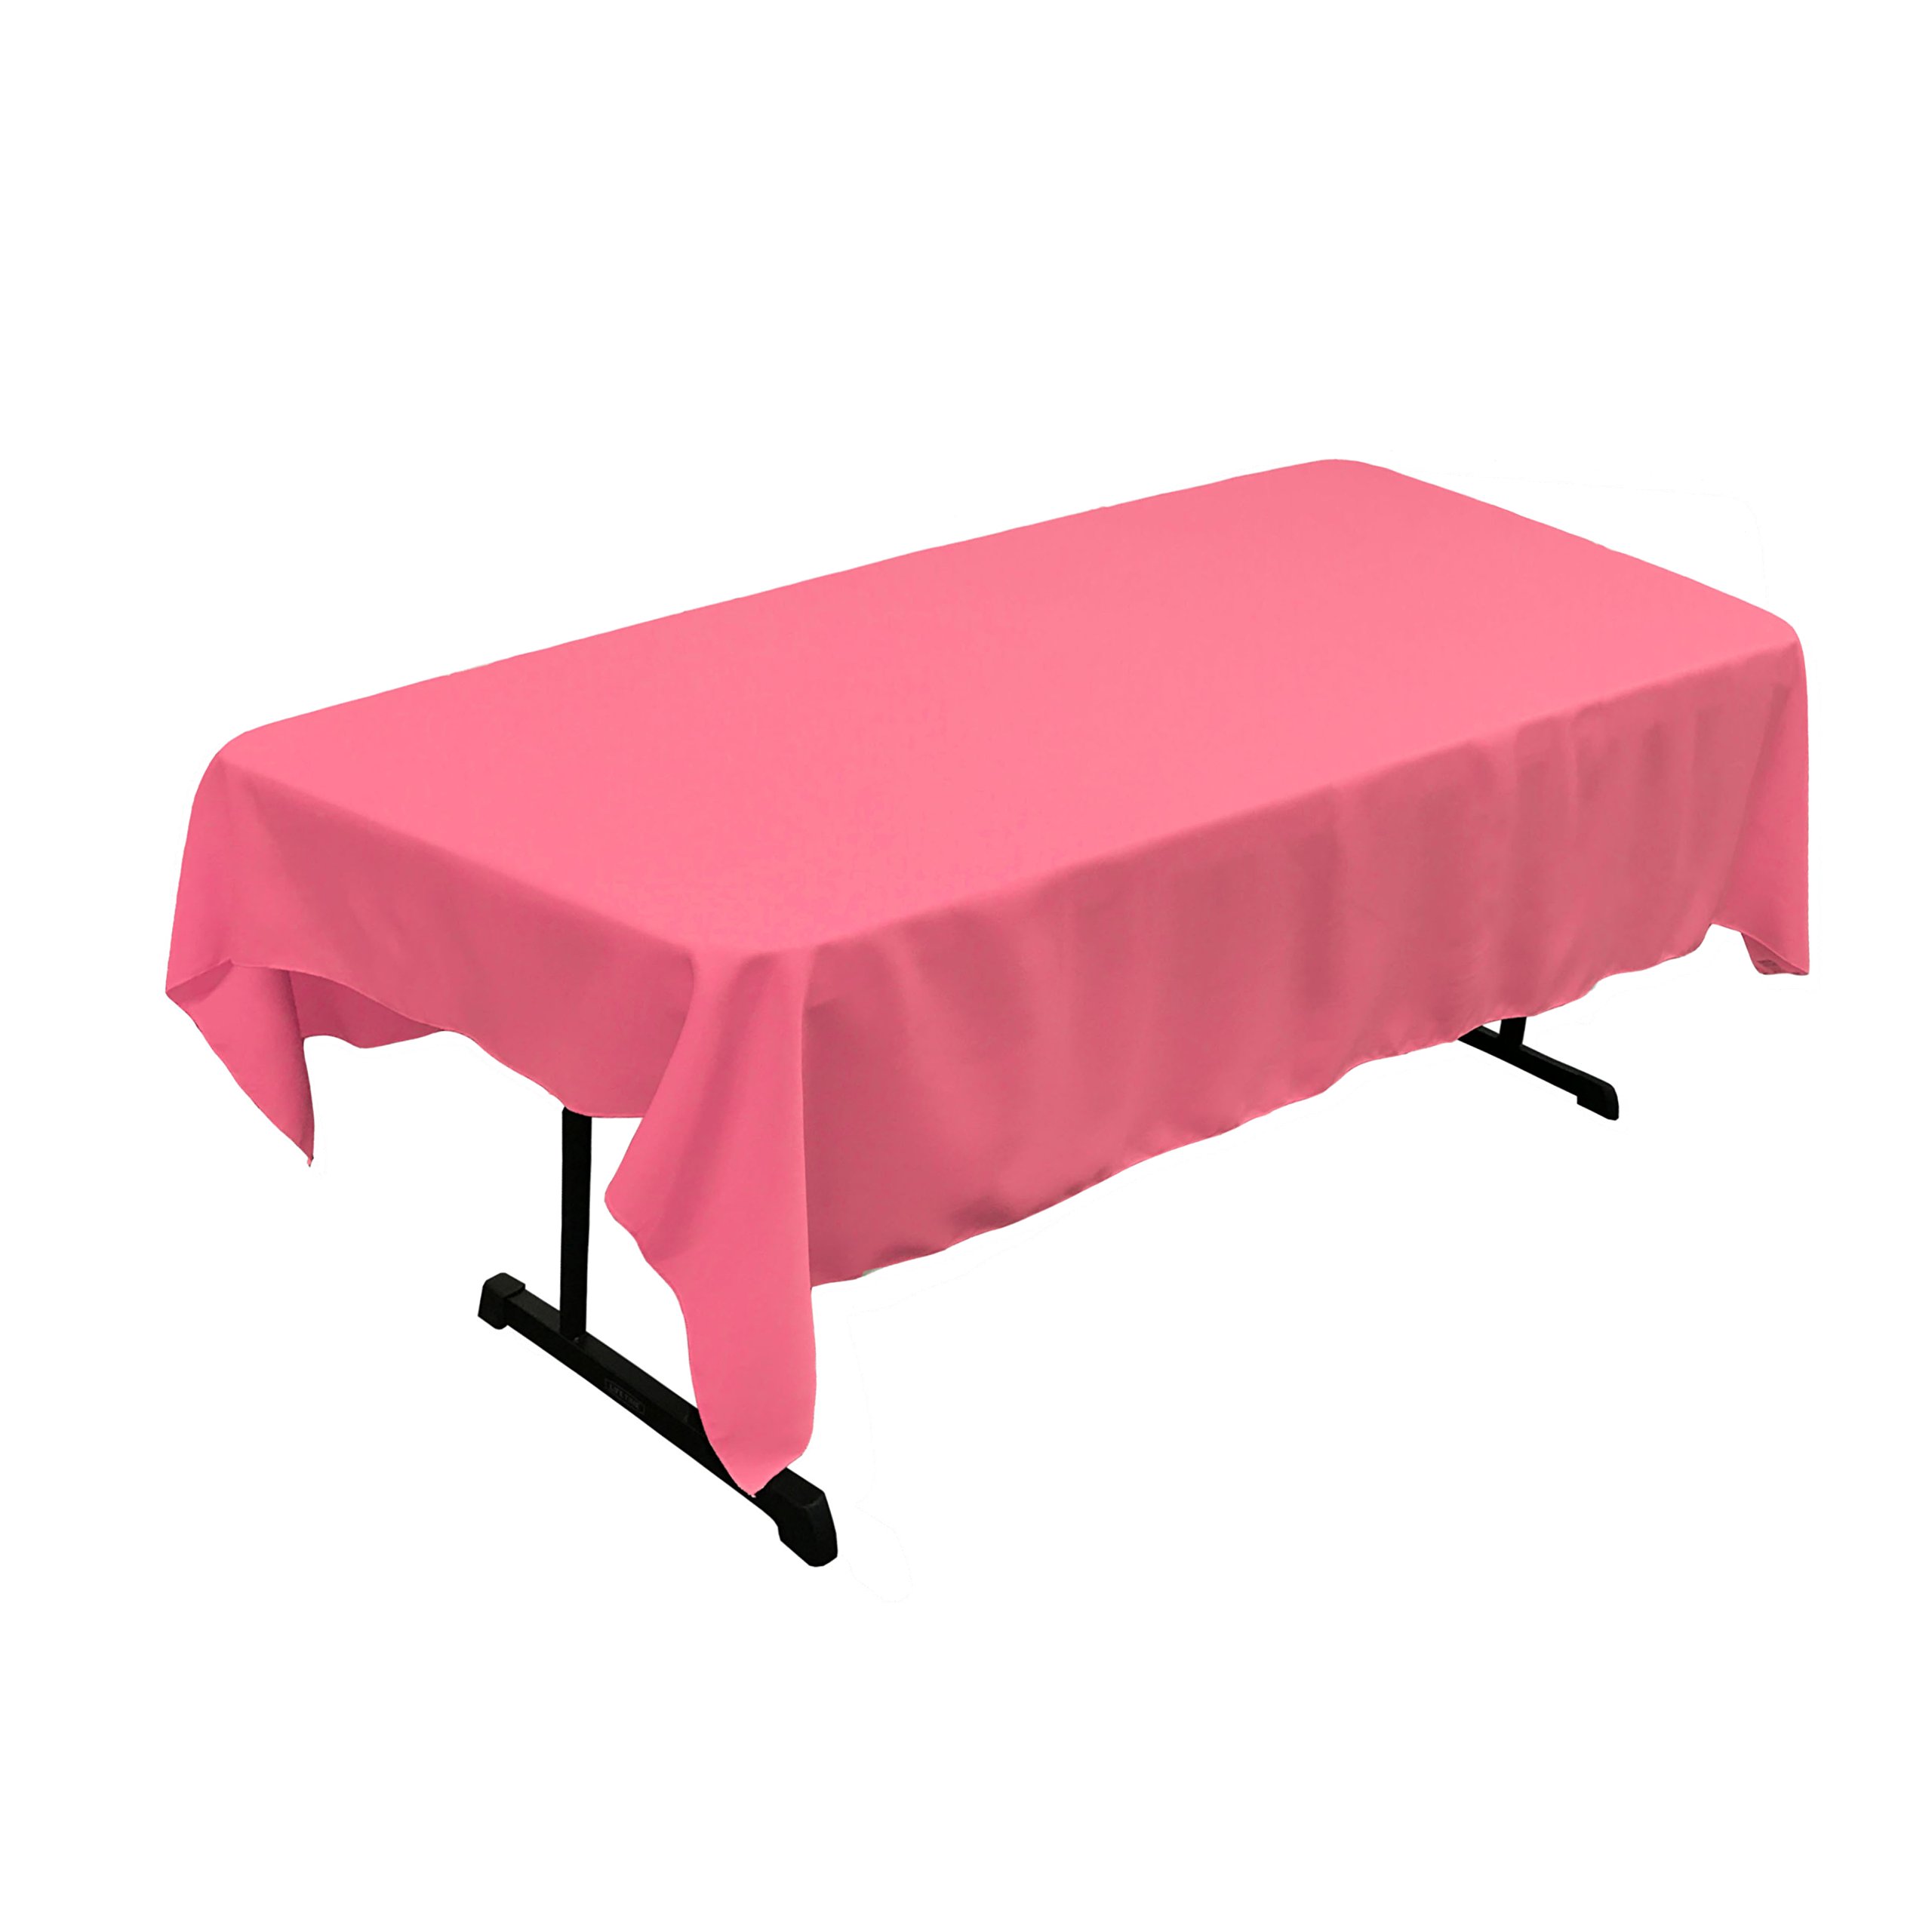 LA Linen Polyester Poplin Washable Rectangular Tablecloth, Stain and Wrinkle Resistant Table Cover 60x84, Fabric Table Cloth for